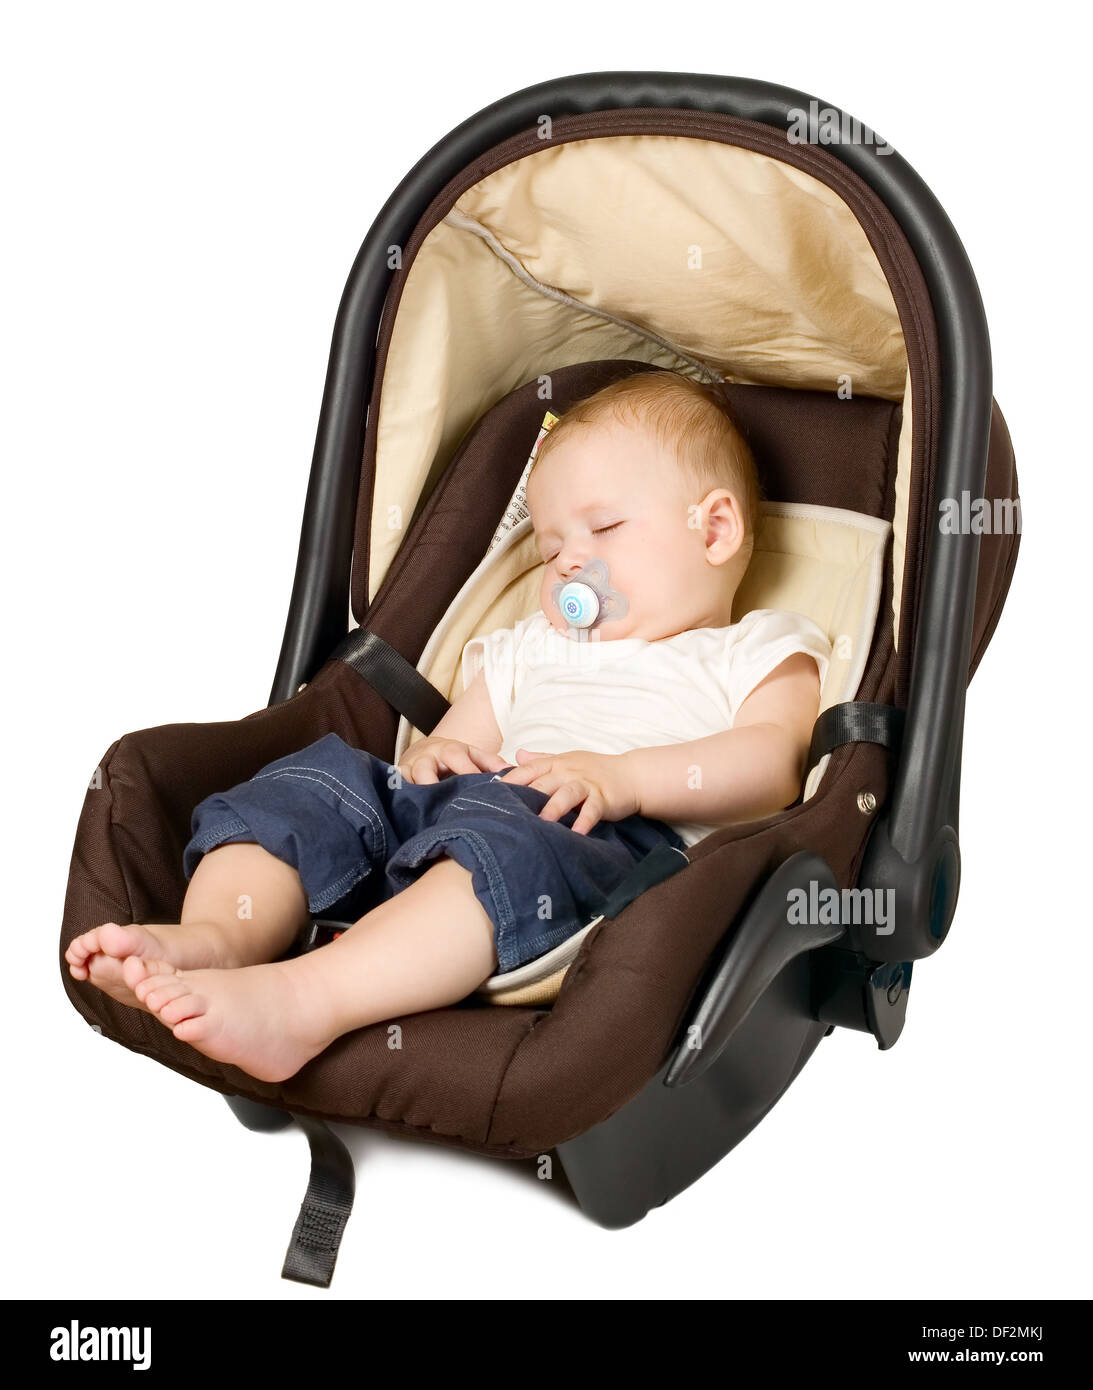 Baby boy is sitting in safety car seat Stock Photo